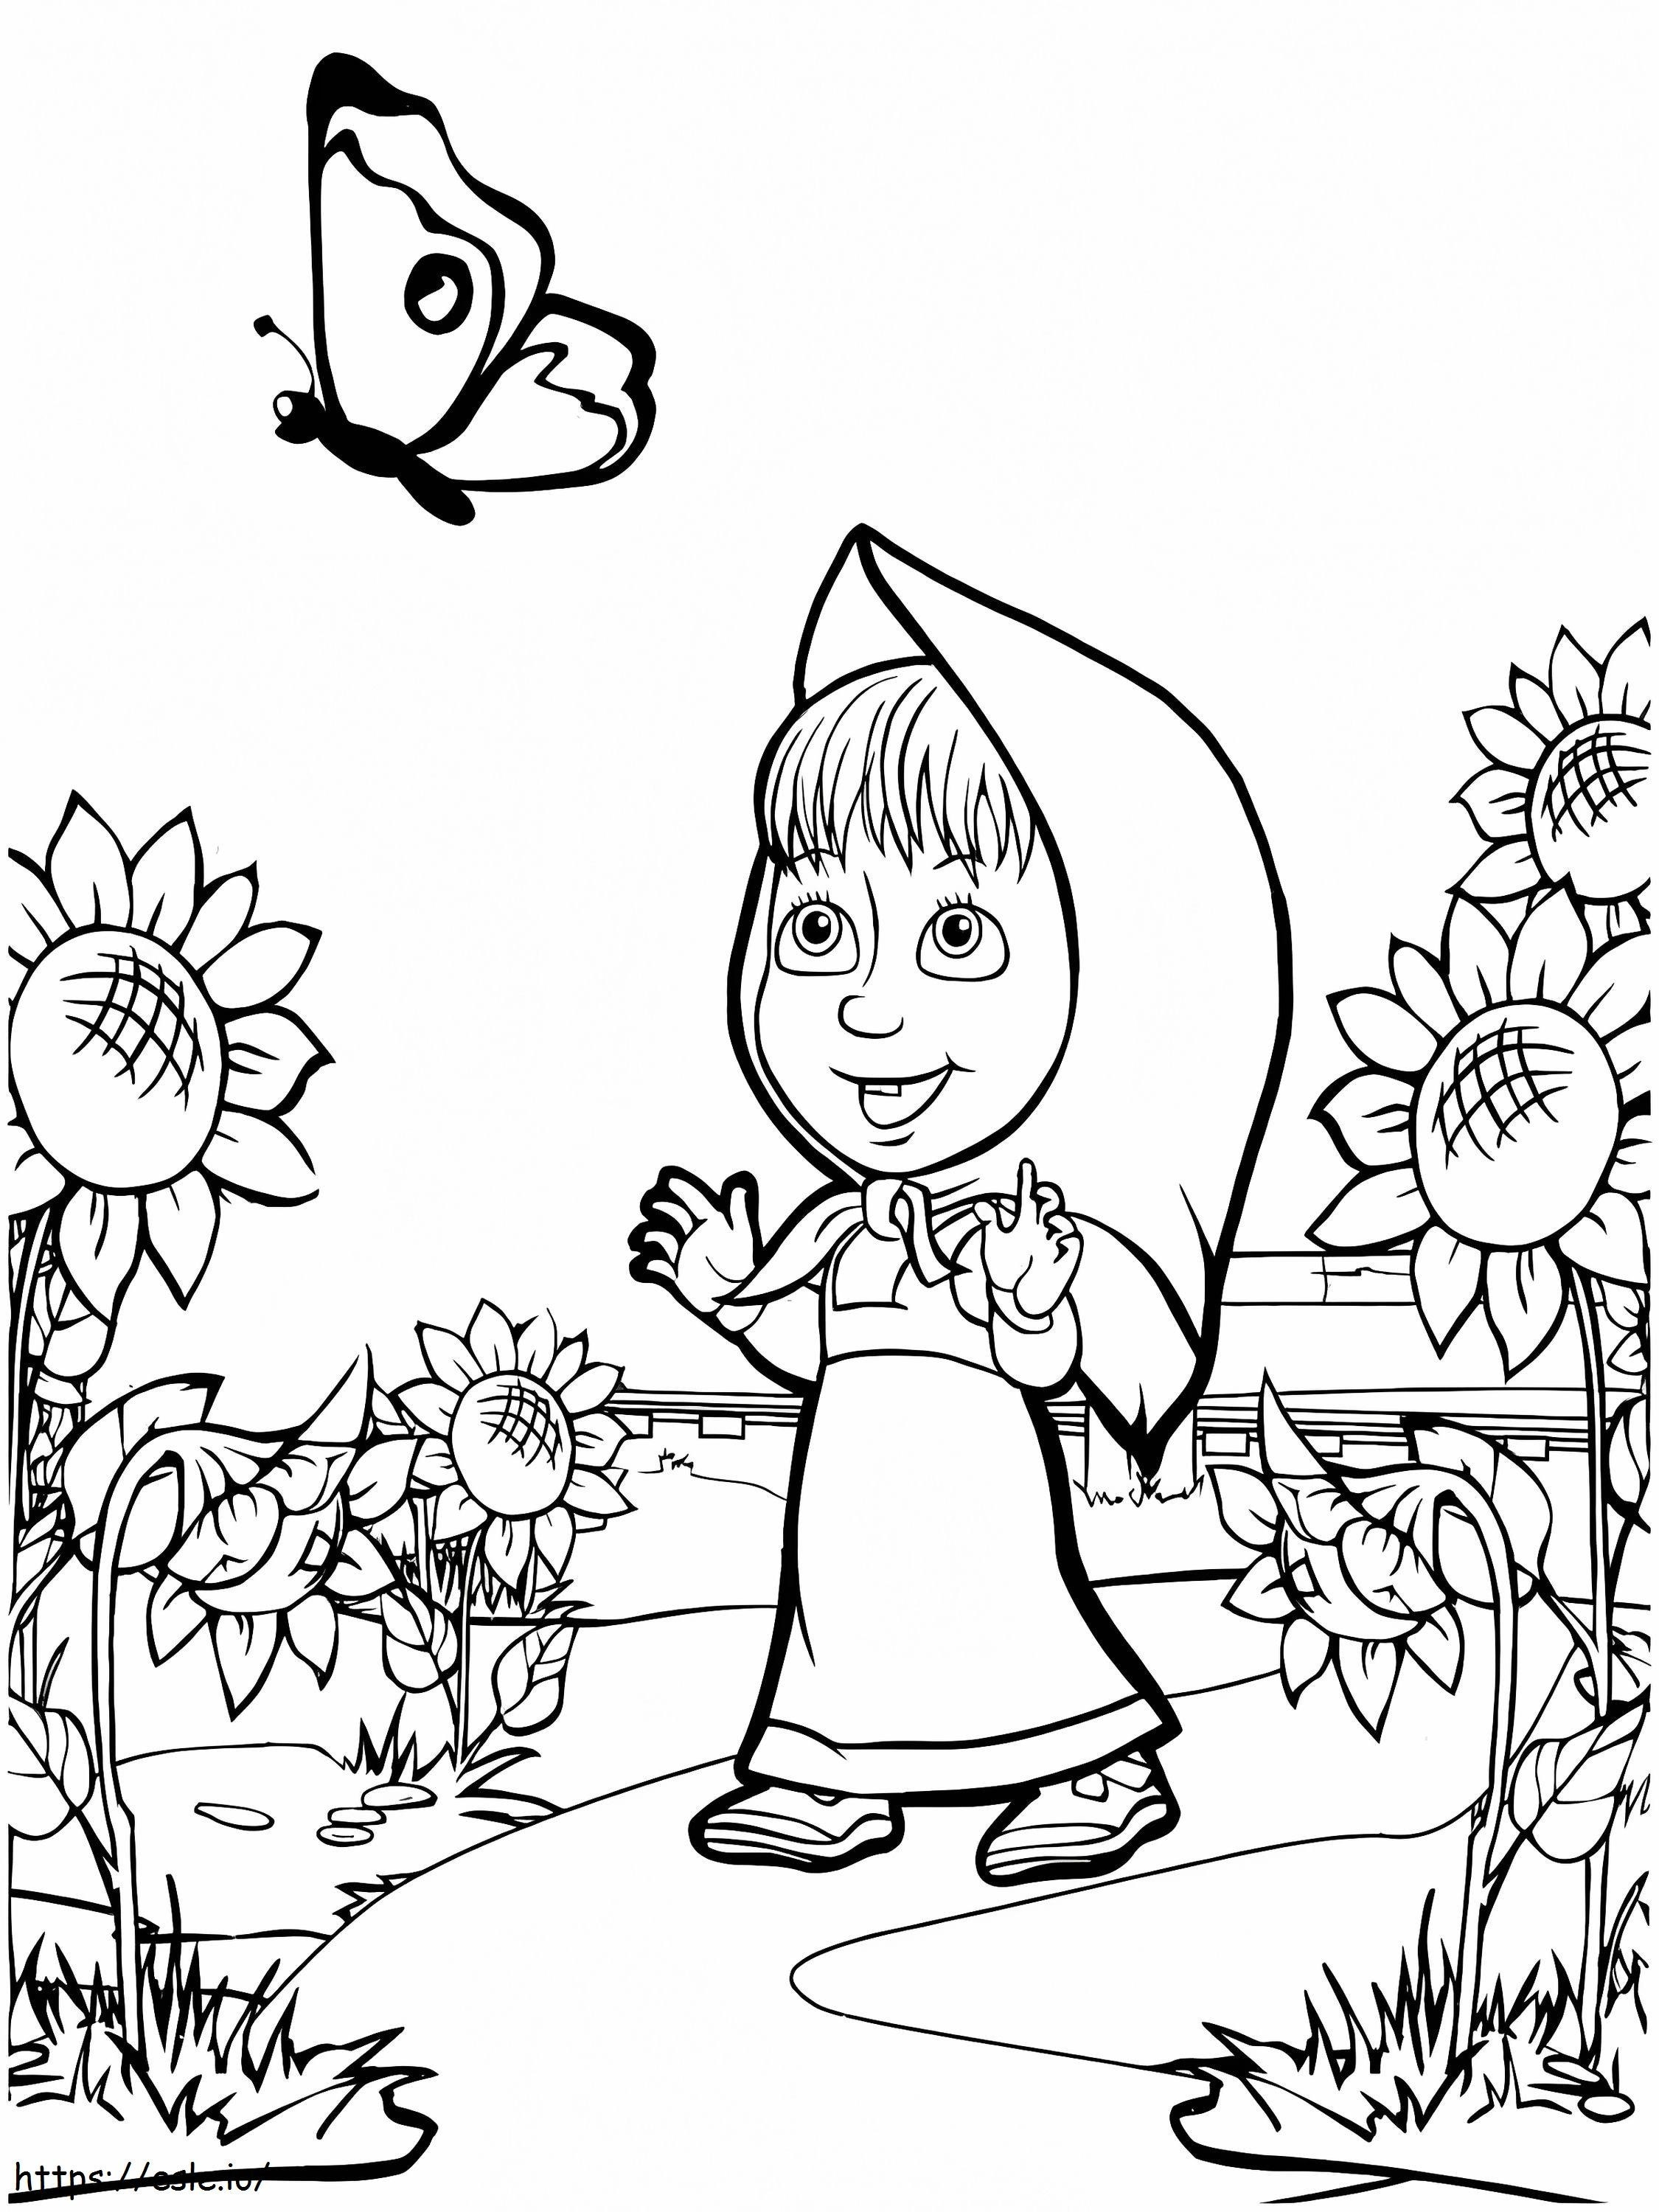 Masha Hunting Butterflies coloring page